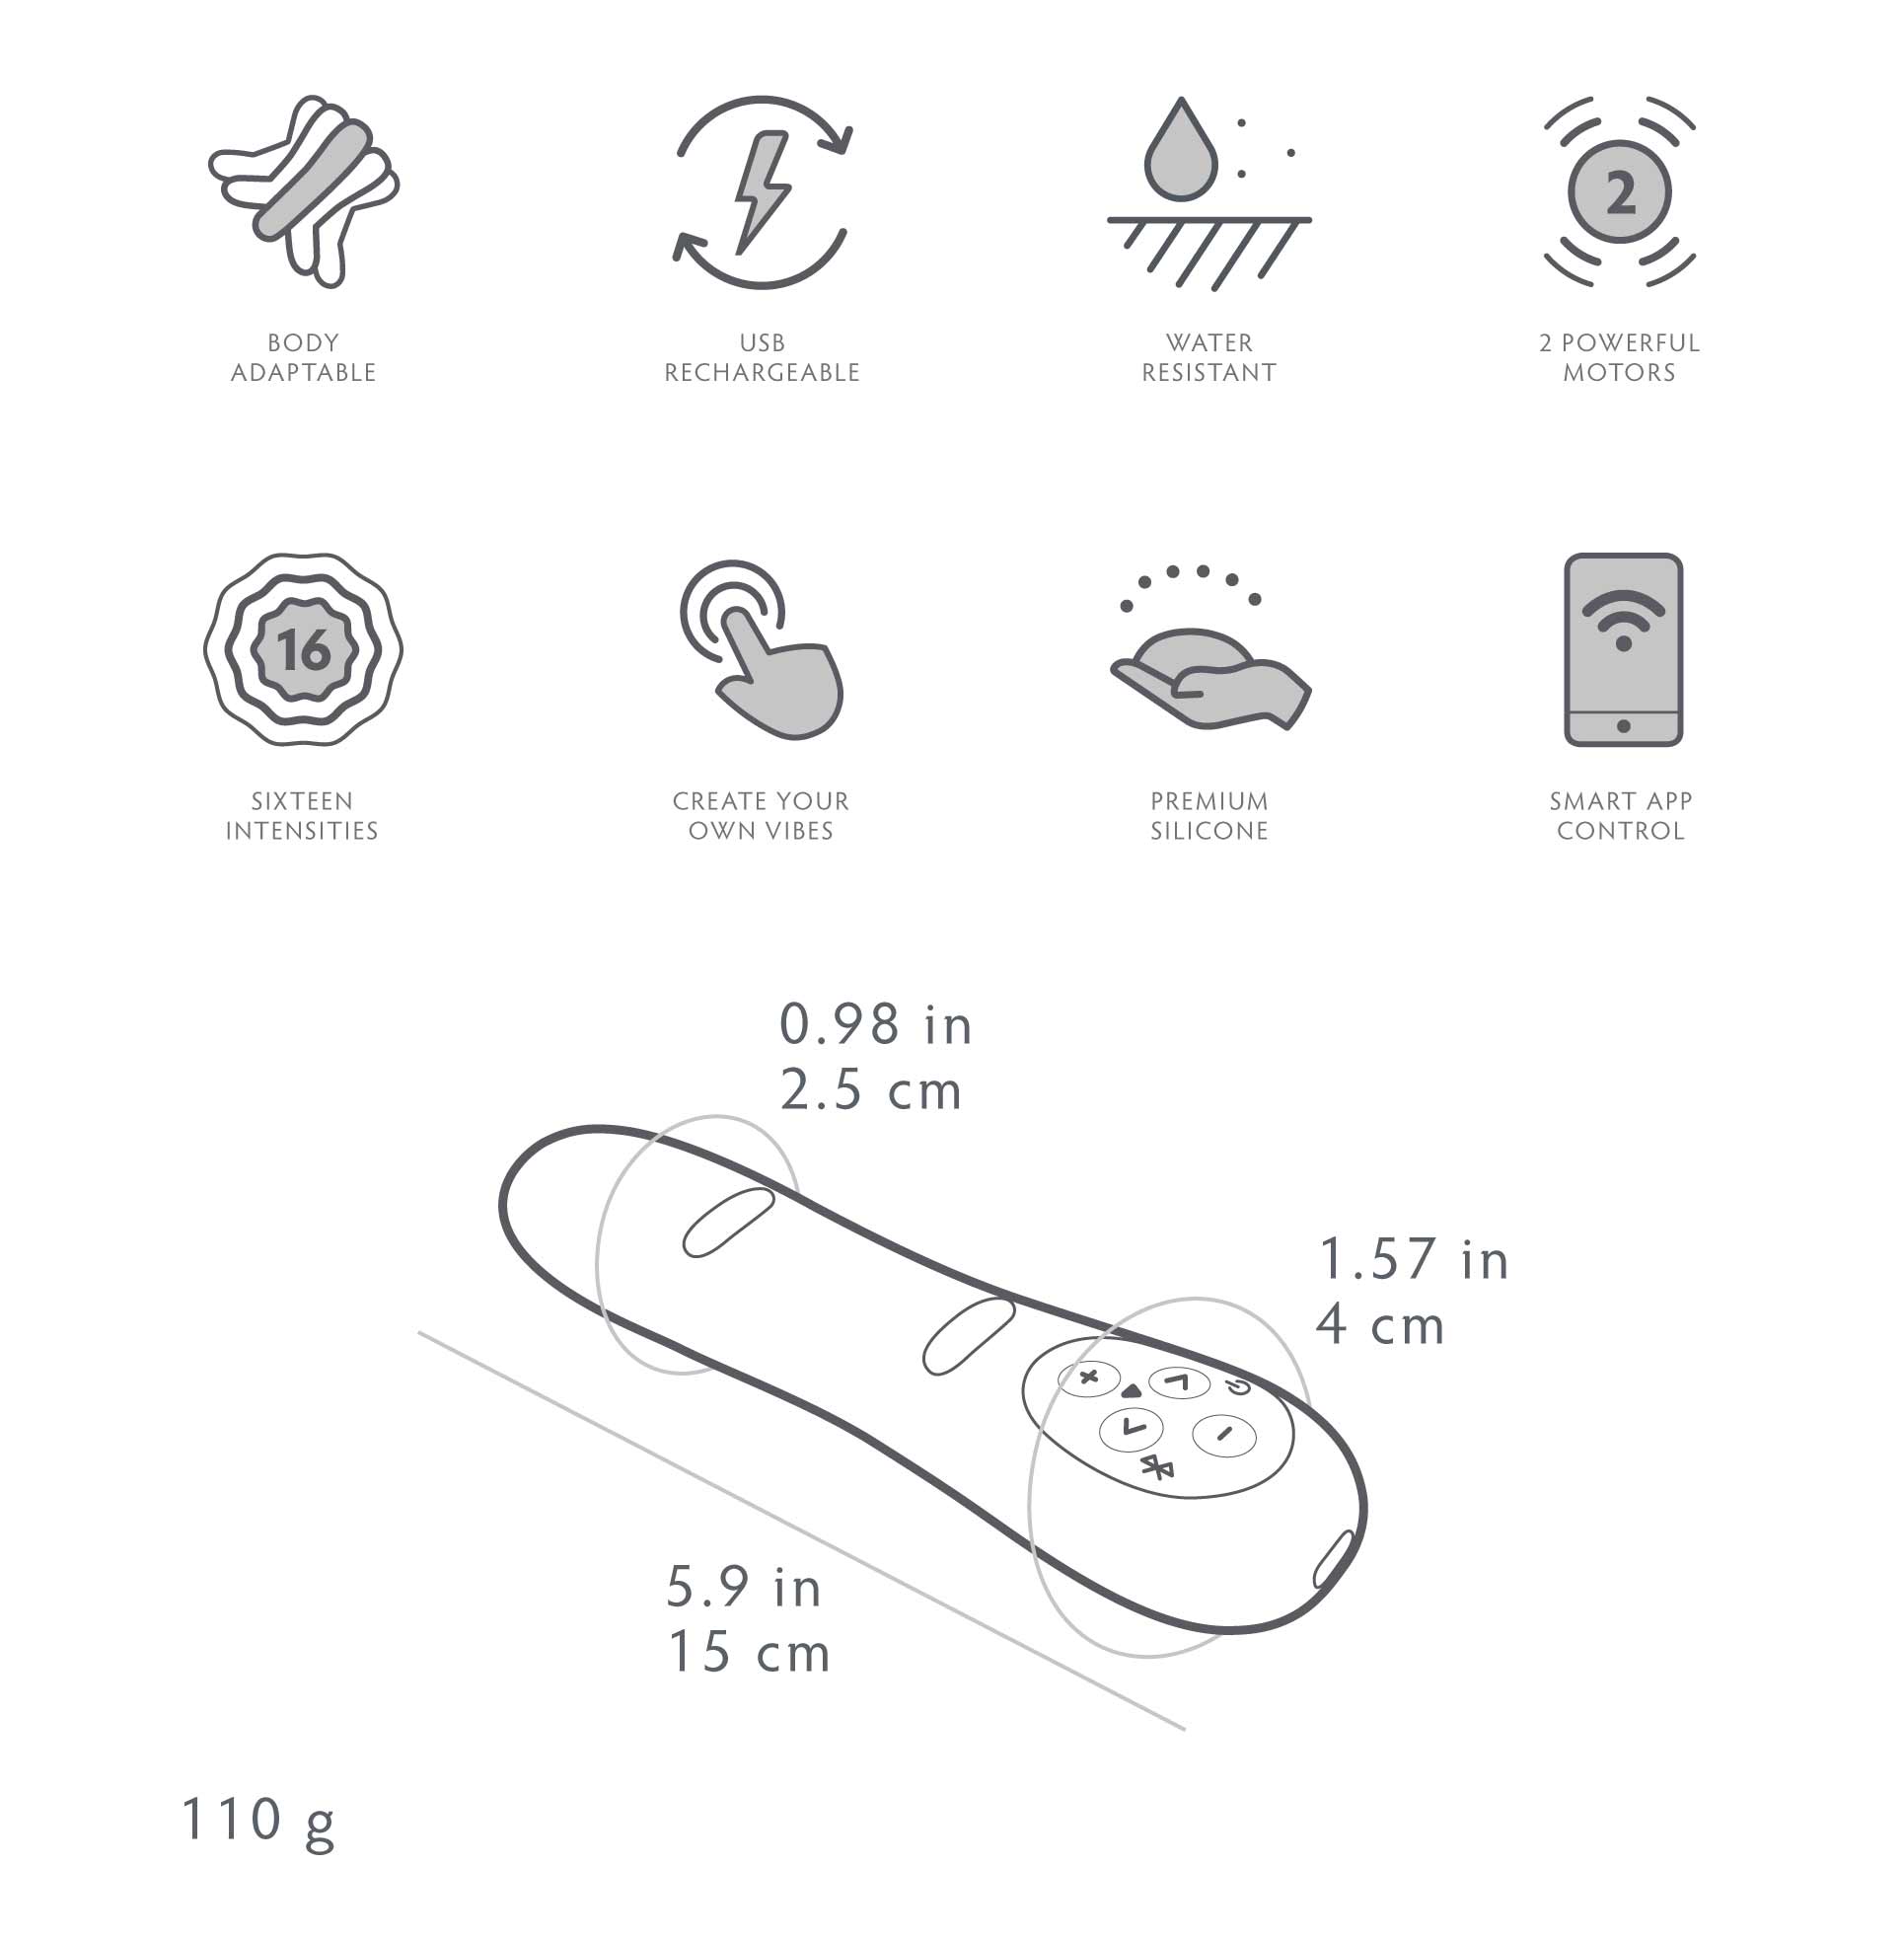 Poco Features and Dimensions